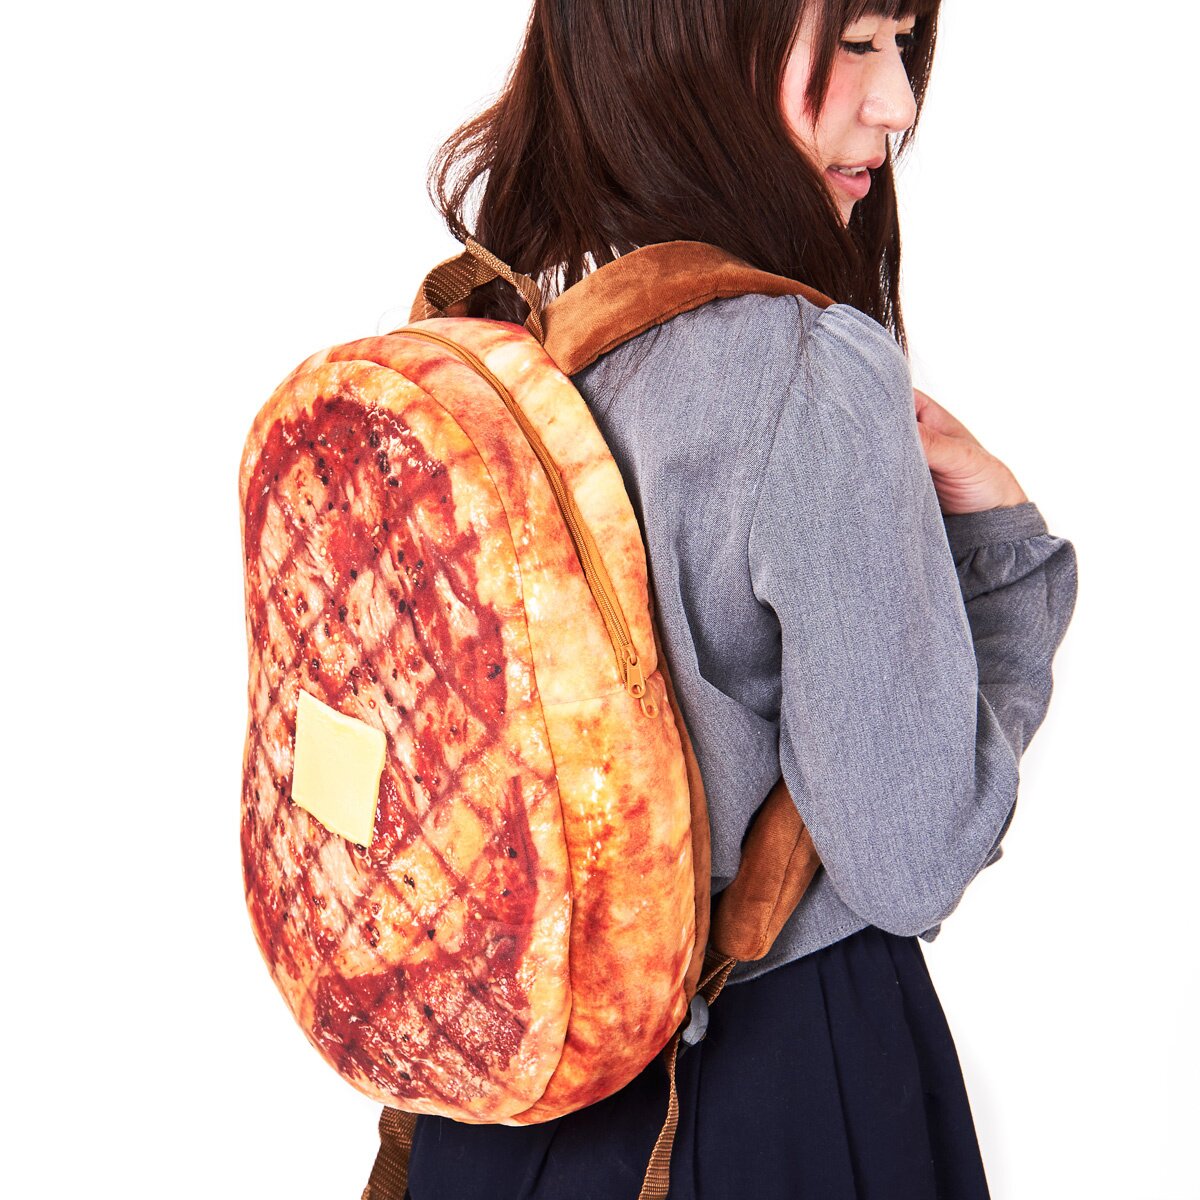 Meat backpacks are a rare and delicious looking fashion accessory